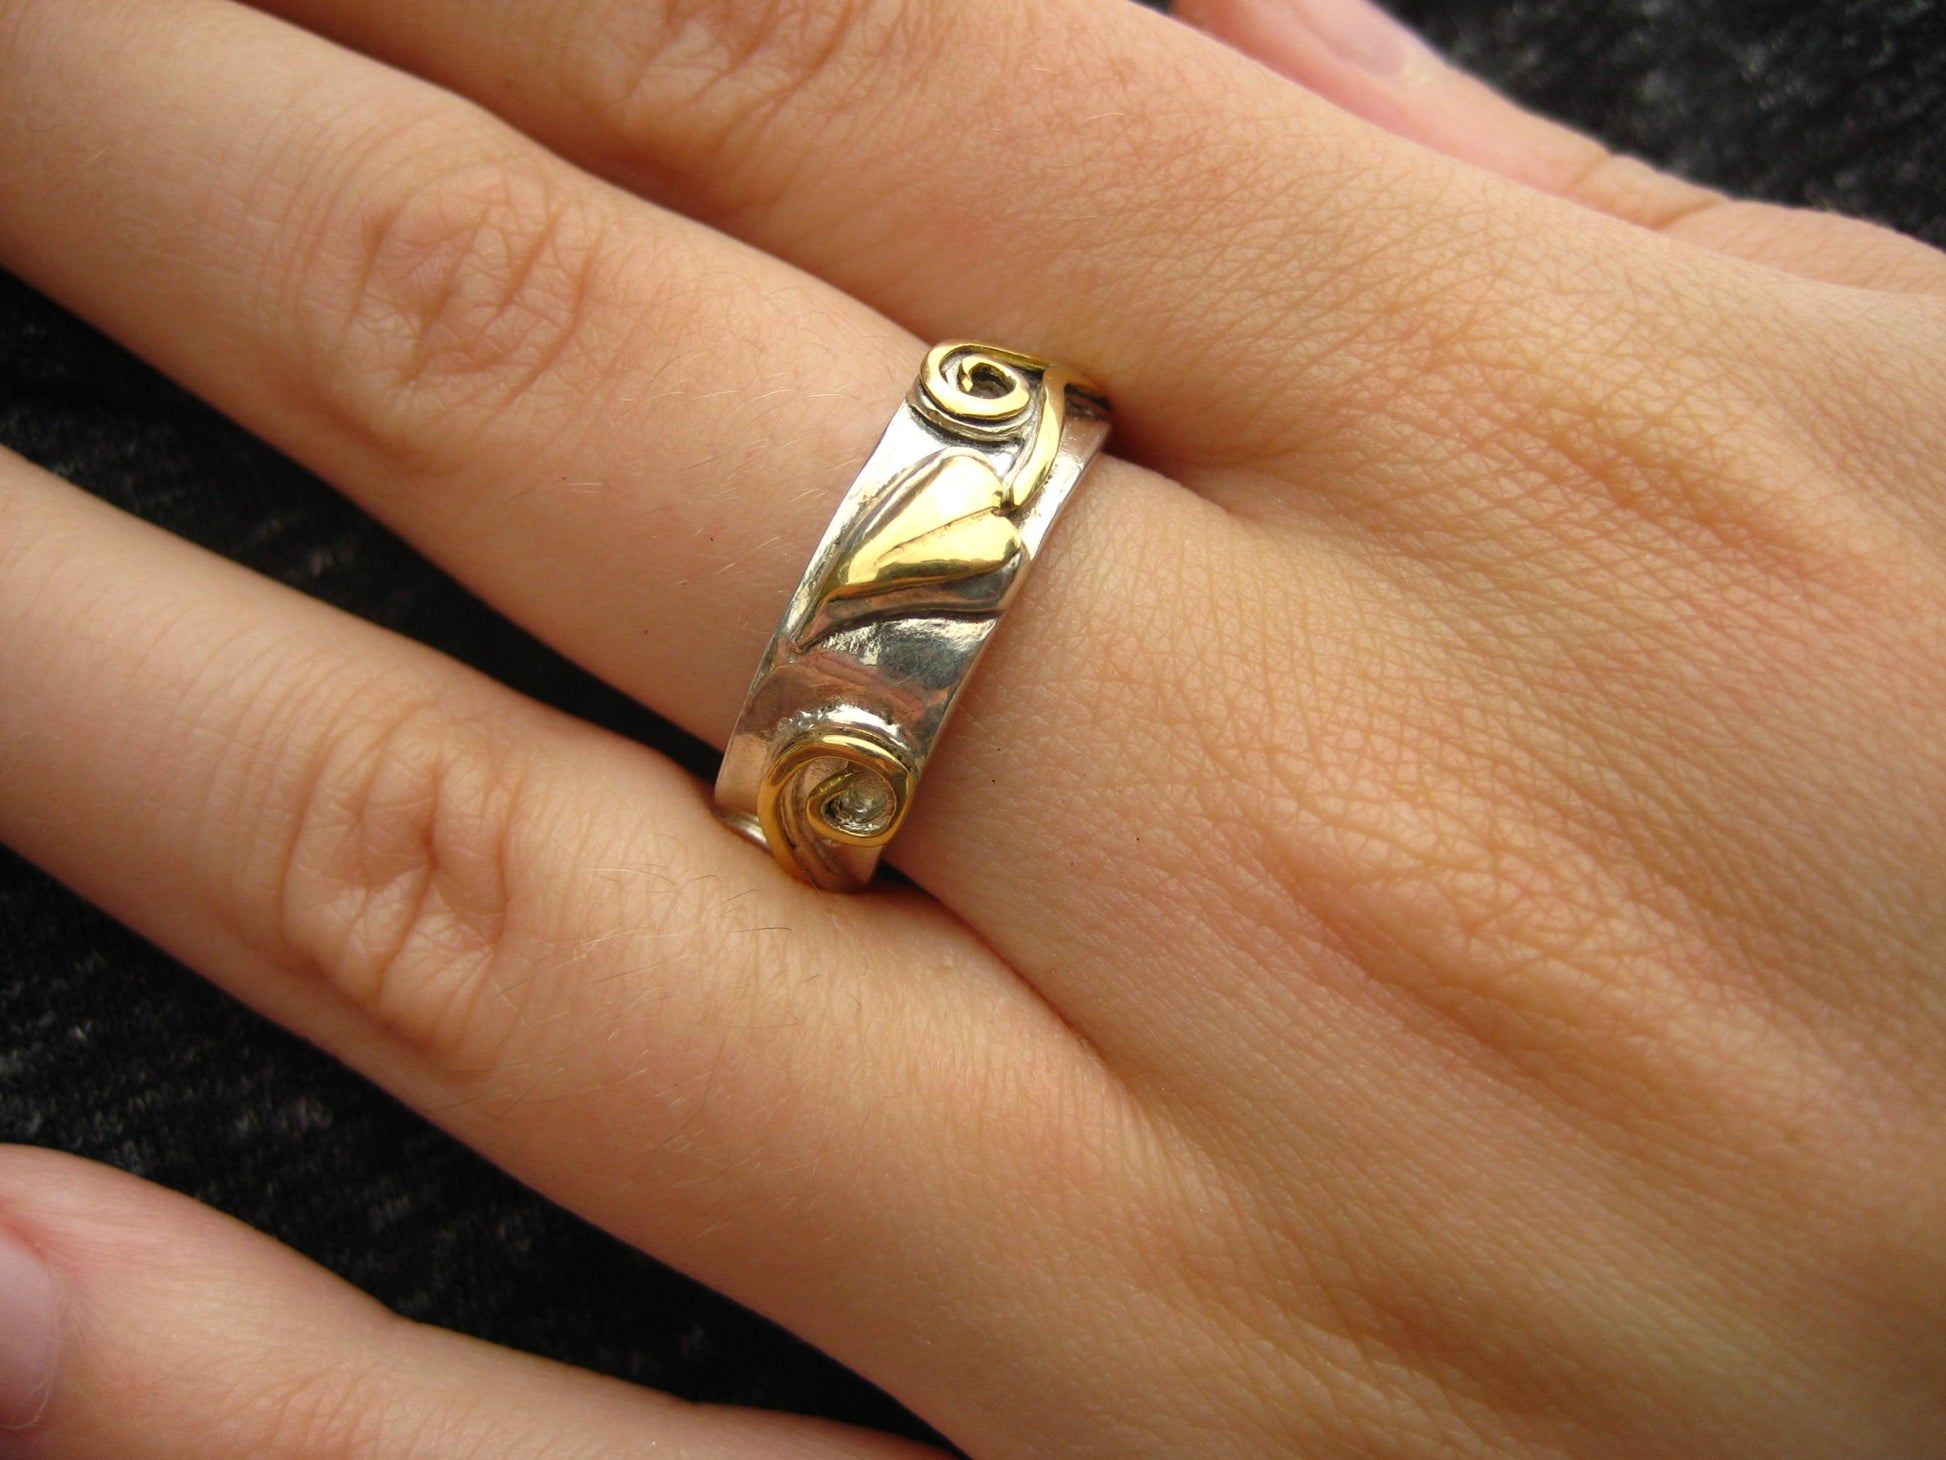 white gold wedding ring with yellow gold decorative raised details, on hand